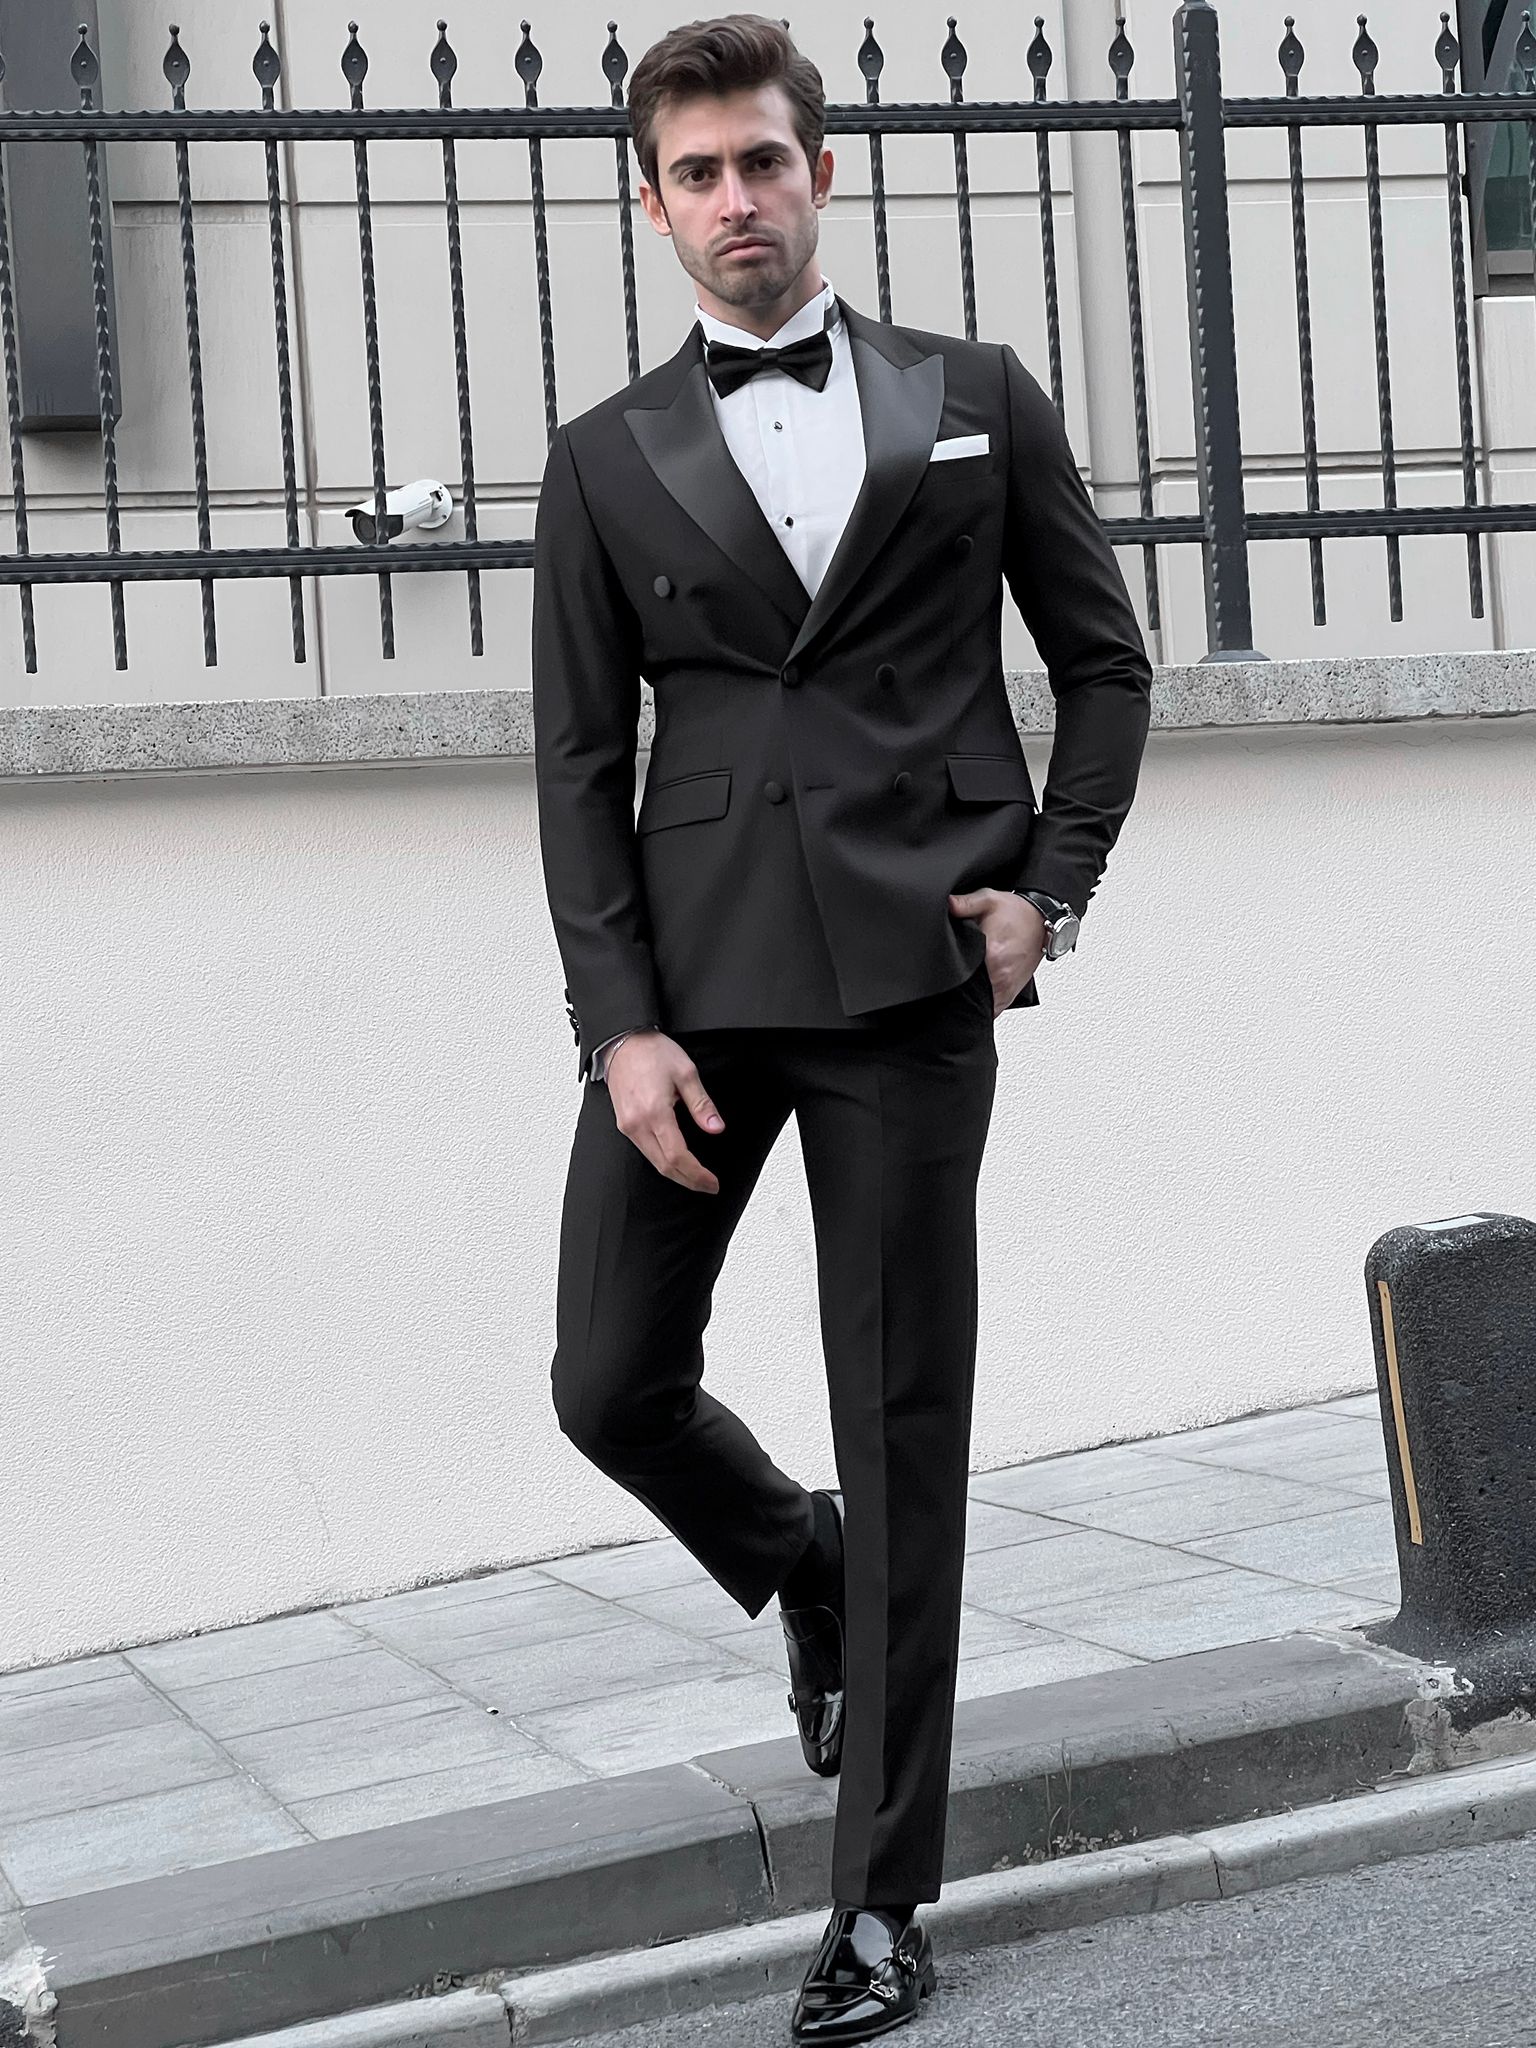 Louis Slim Fit High Quality Pointed Collared Double Breasted Tuxedo (Party Suit/Tuxedo)